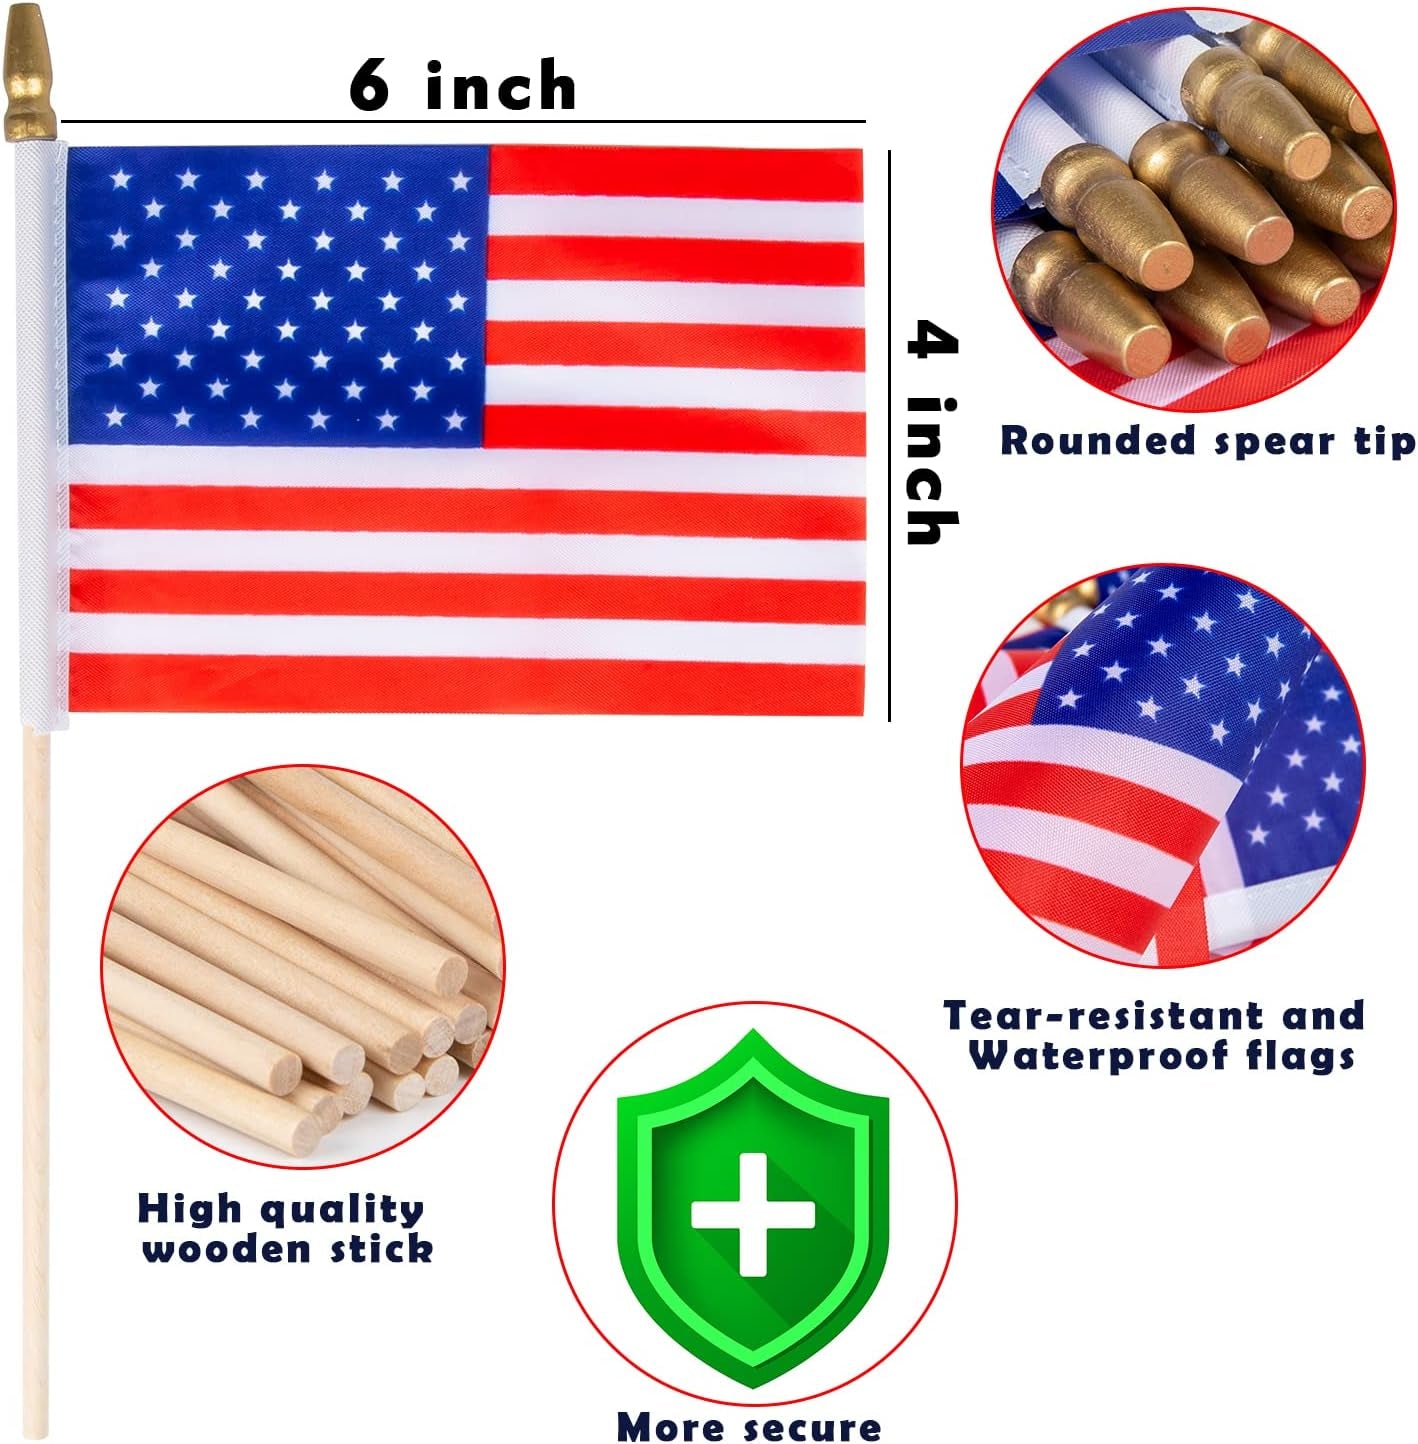 40 Pack Small American Flags on Stick 4*6 Inch Mini American Flags for 4Th of July Decorations Memorial Day Decorations Patriotic Decorations US American Hand Held Wooden Stick Flag with Kid-Safe